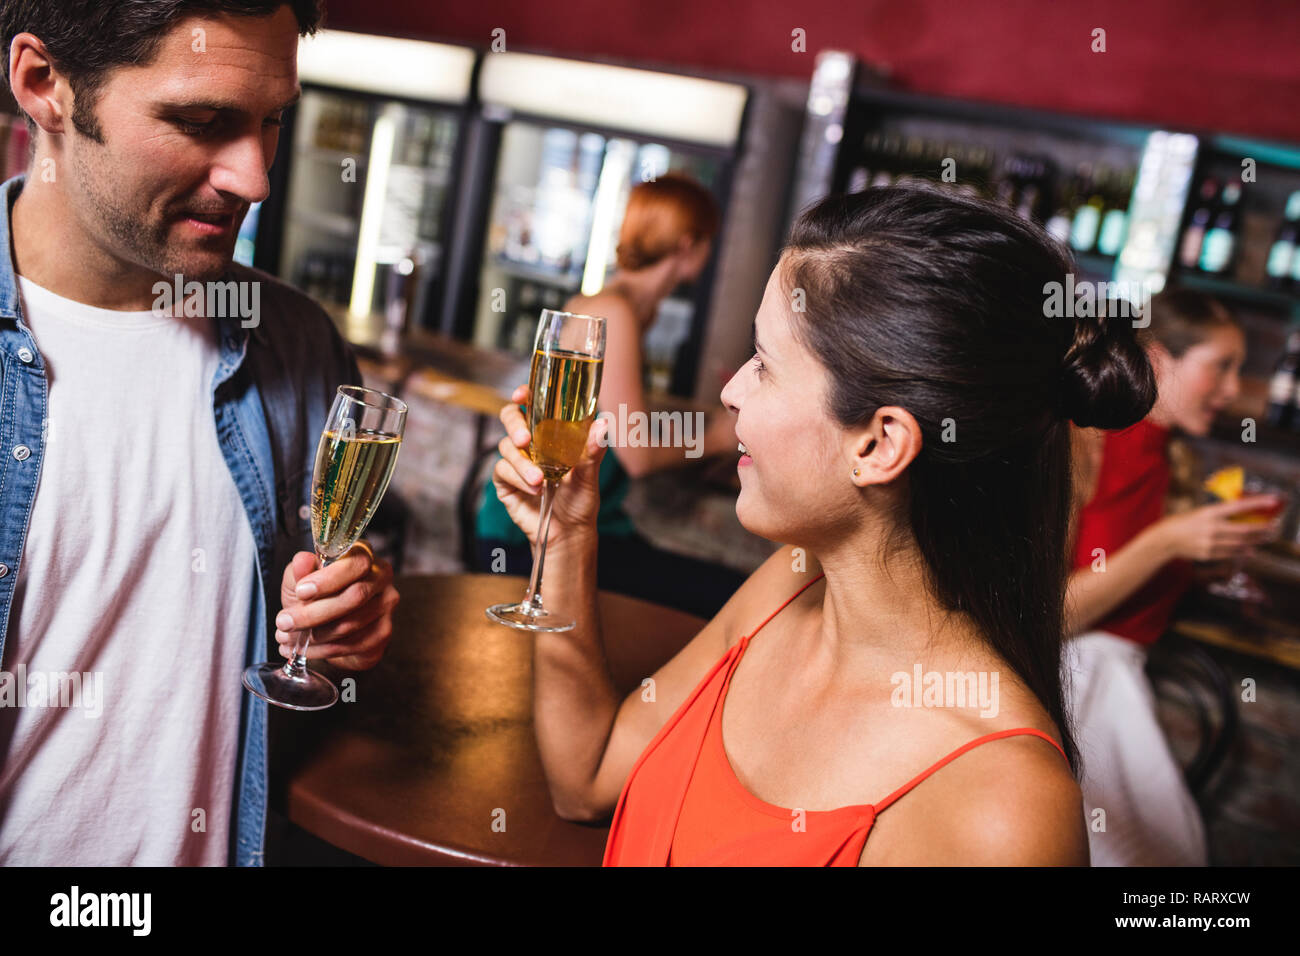 Couple enjoying champagne in nightclub Banque D'Images